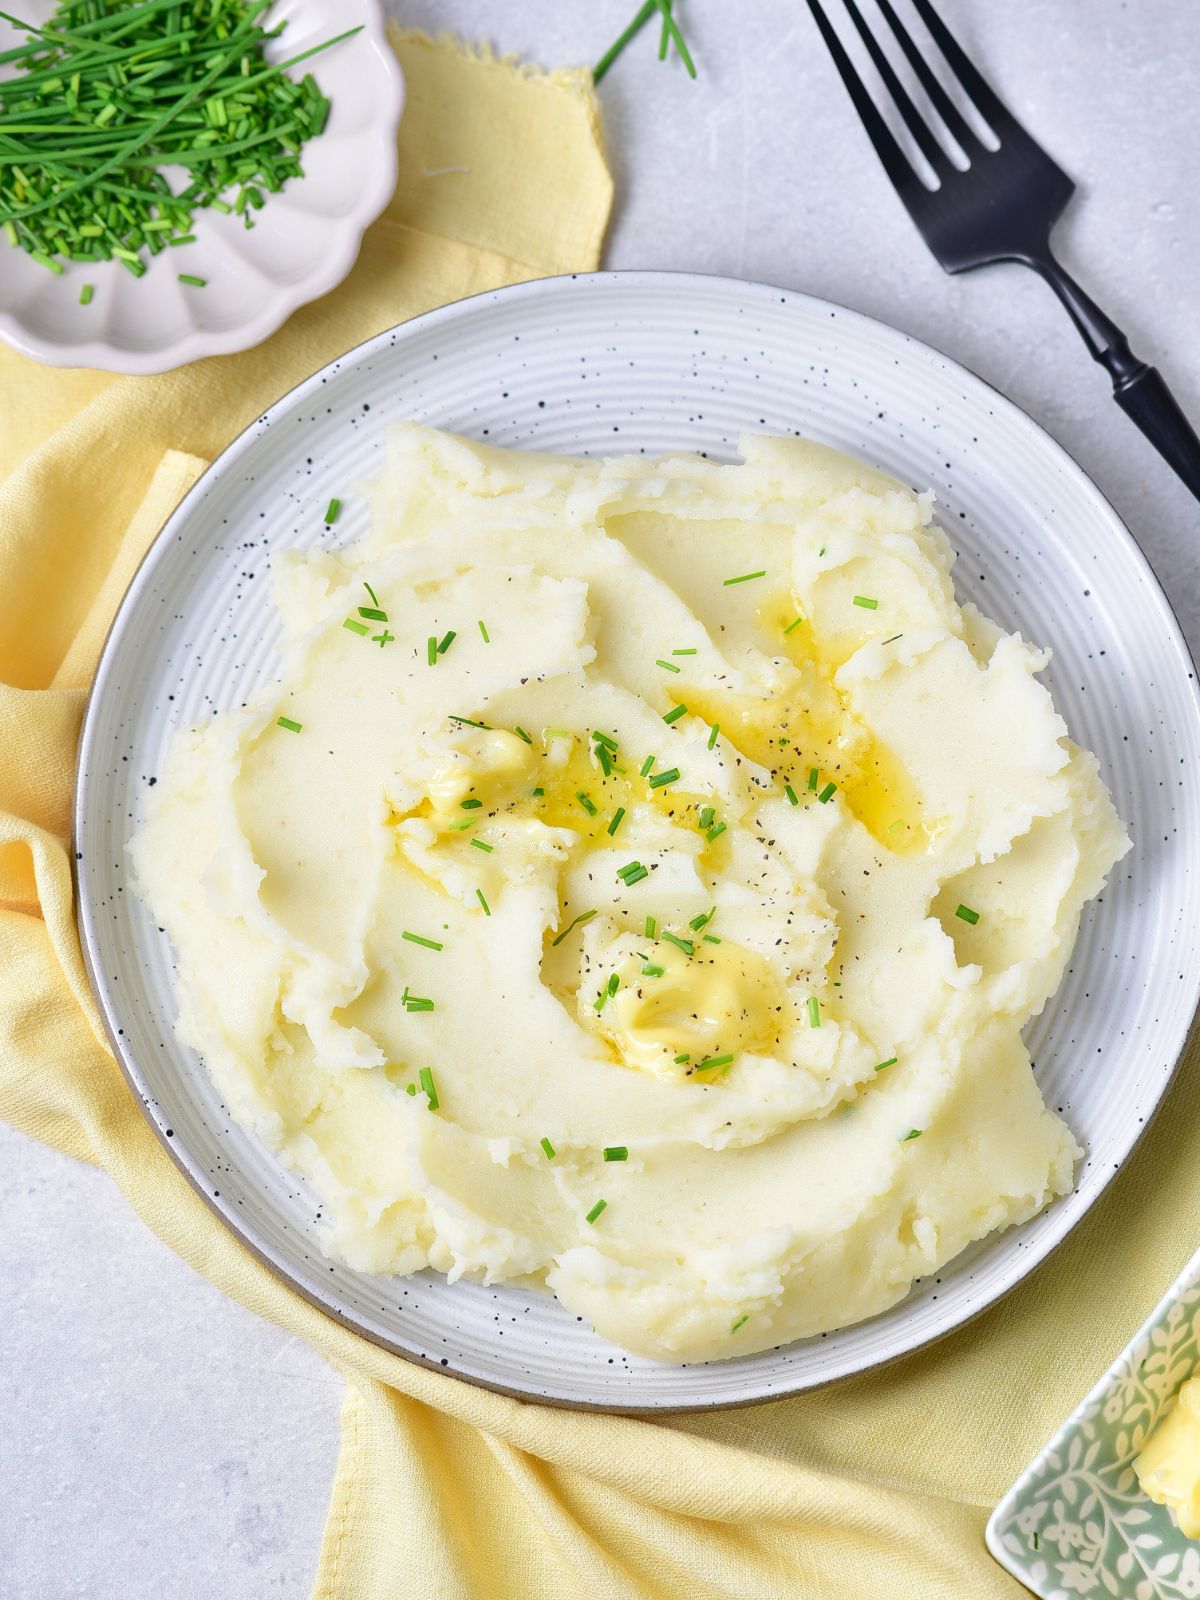 mashed potatoes on plate with small plate of chopped herbs.